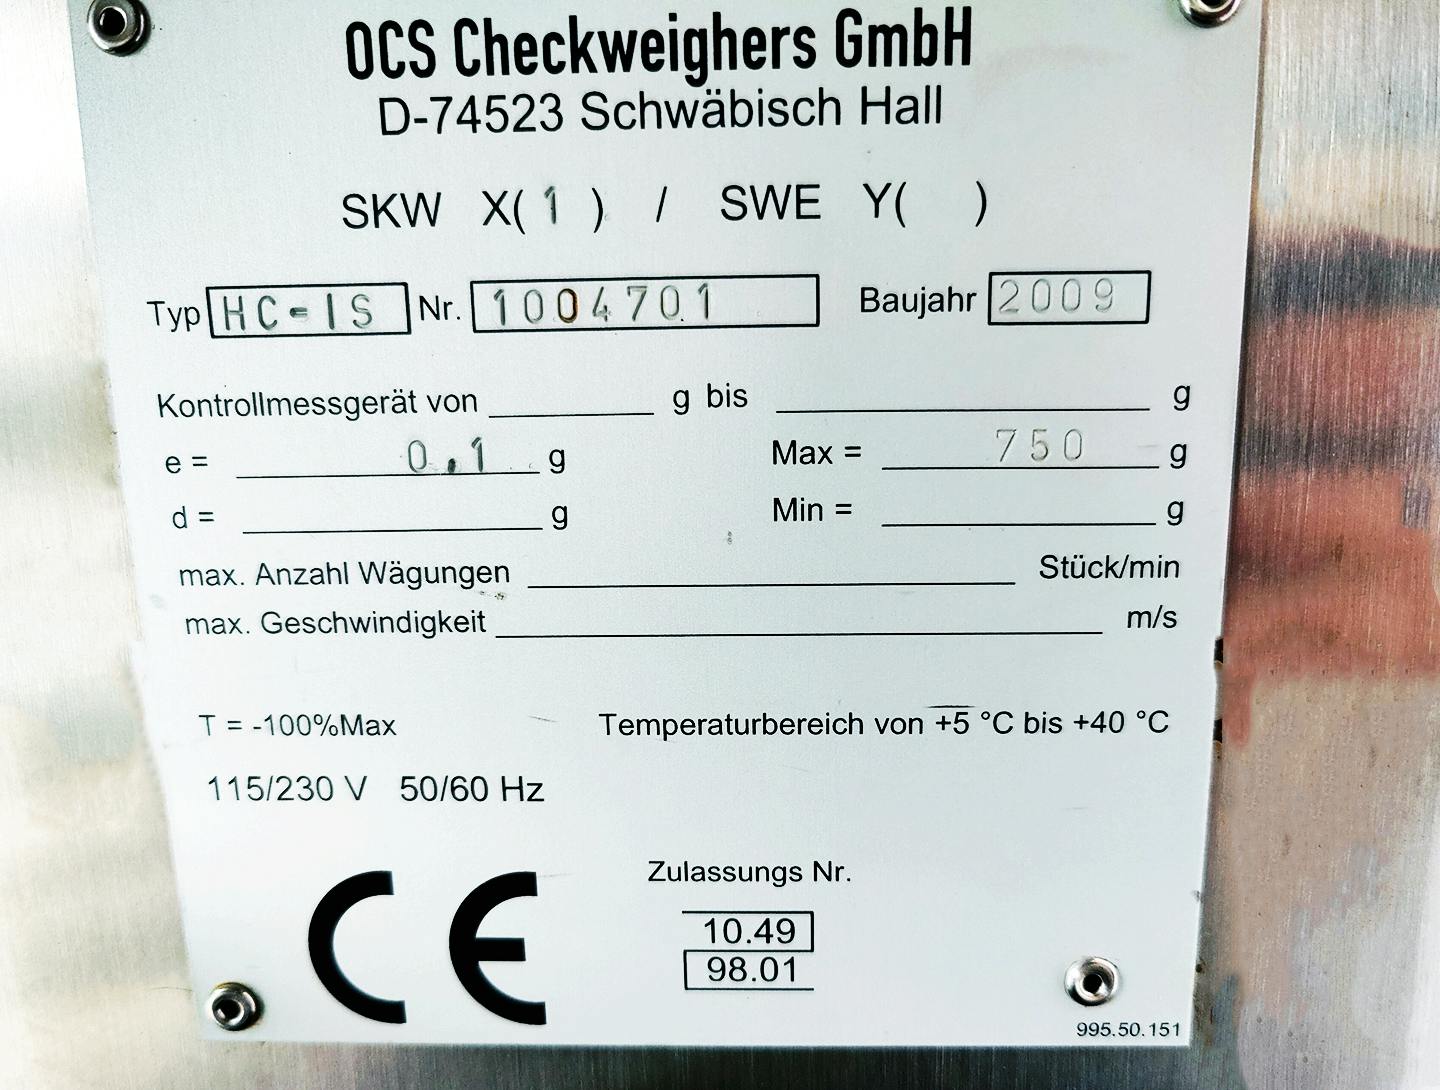 OCS Checkweighers HC-IS - Transporte diverso - image 10